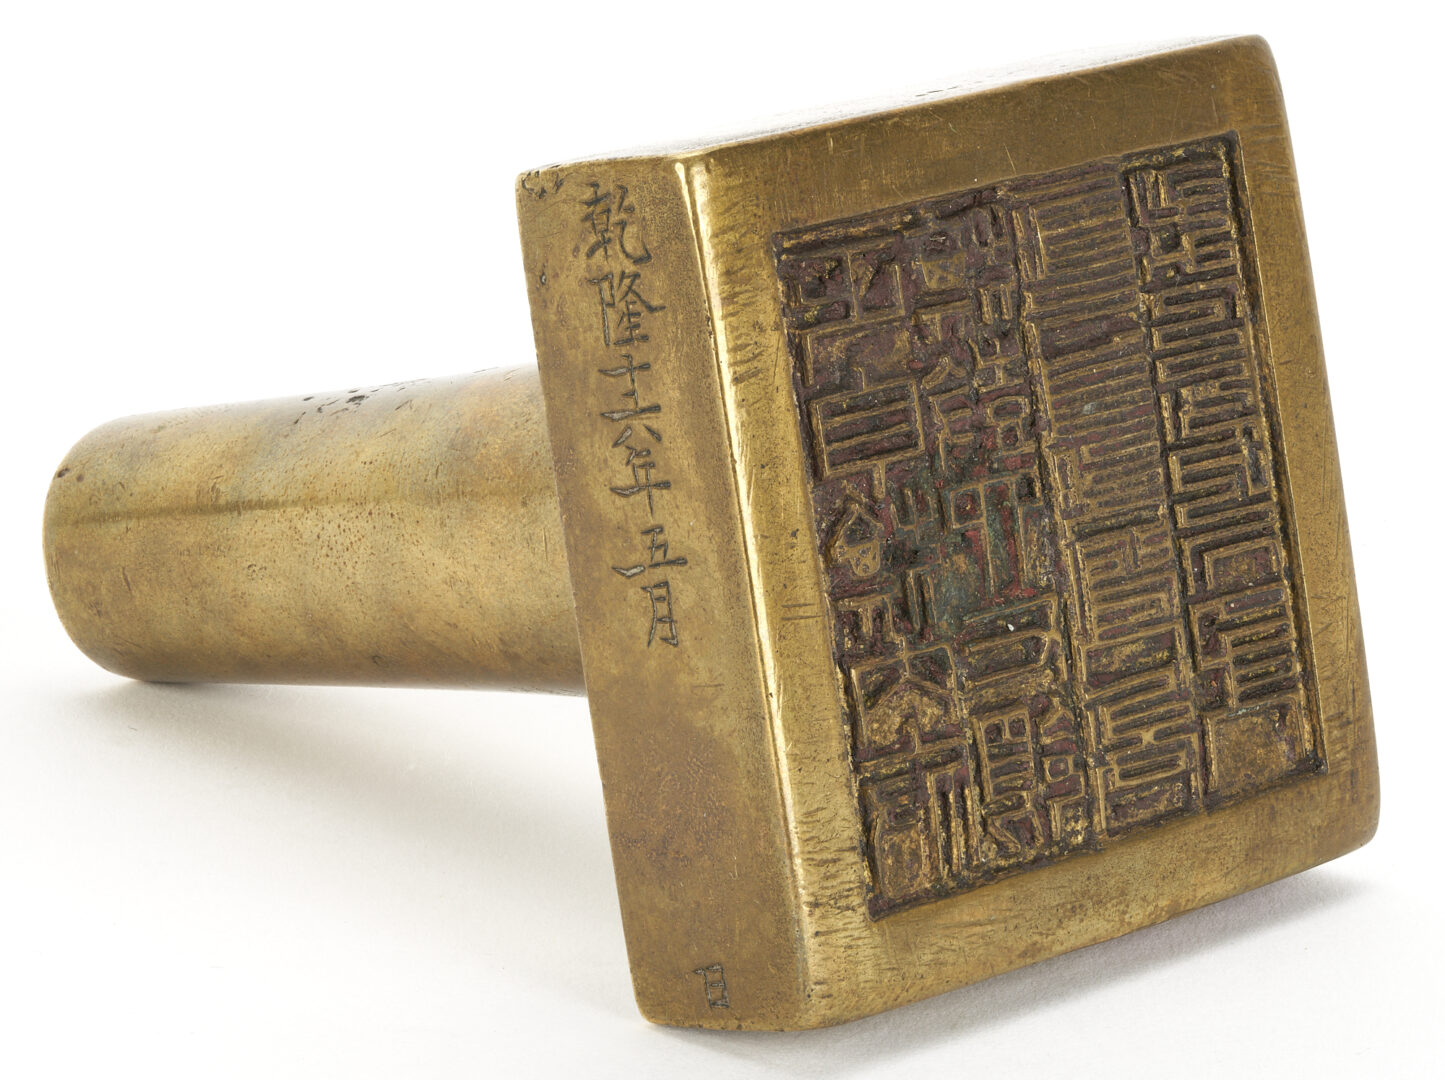 Lot 3: Chinese Manchu Ministry of Rites Brass Seal, Qing Dynasty